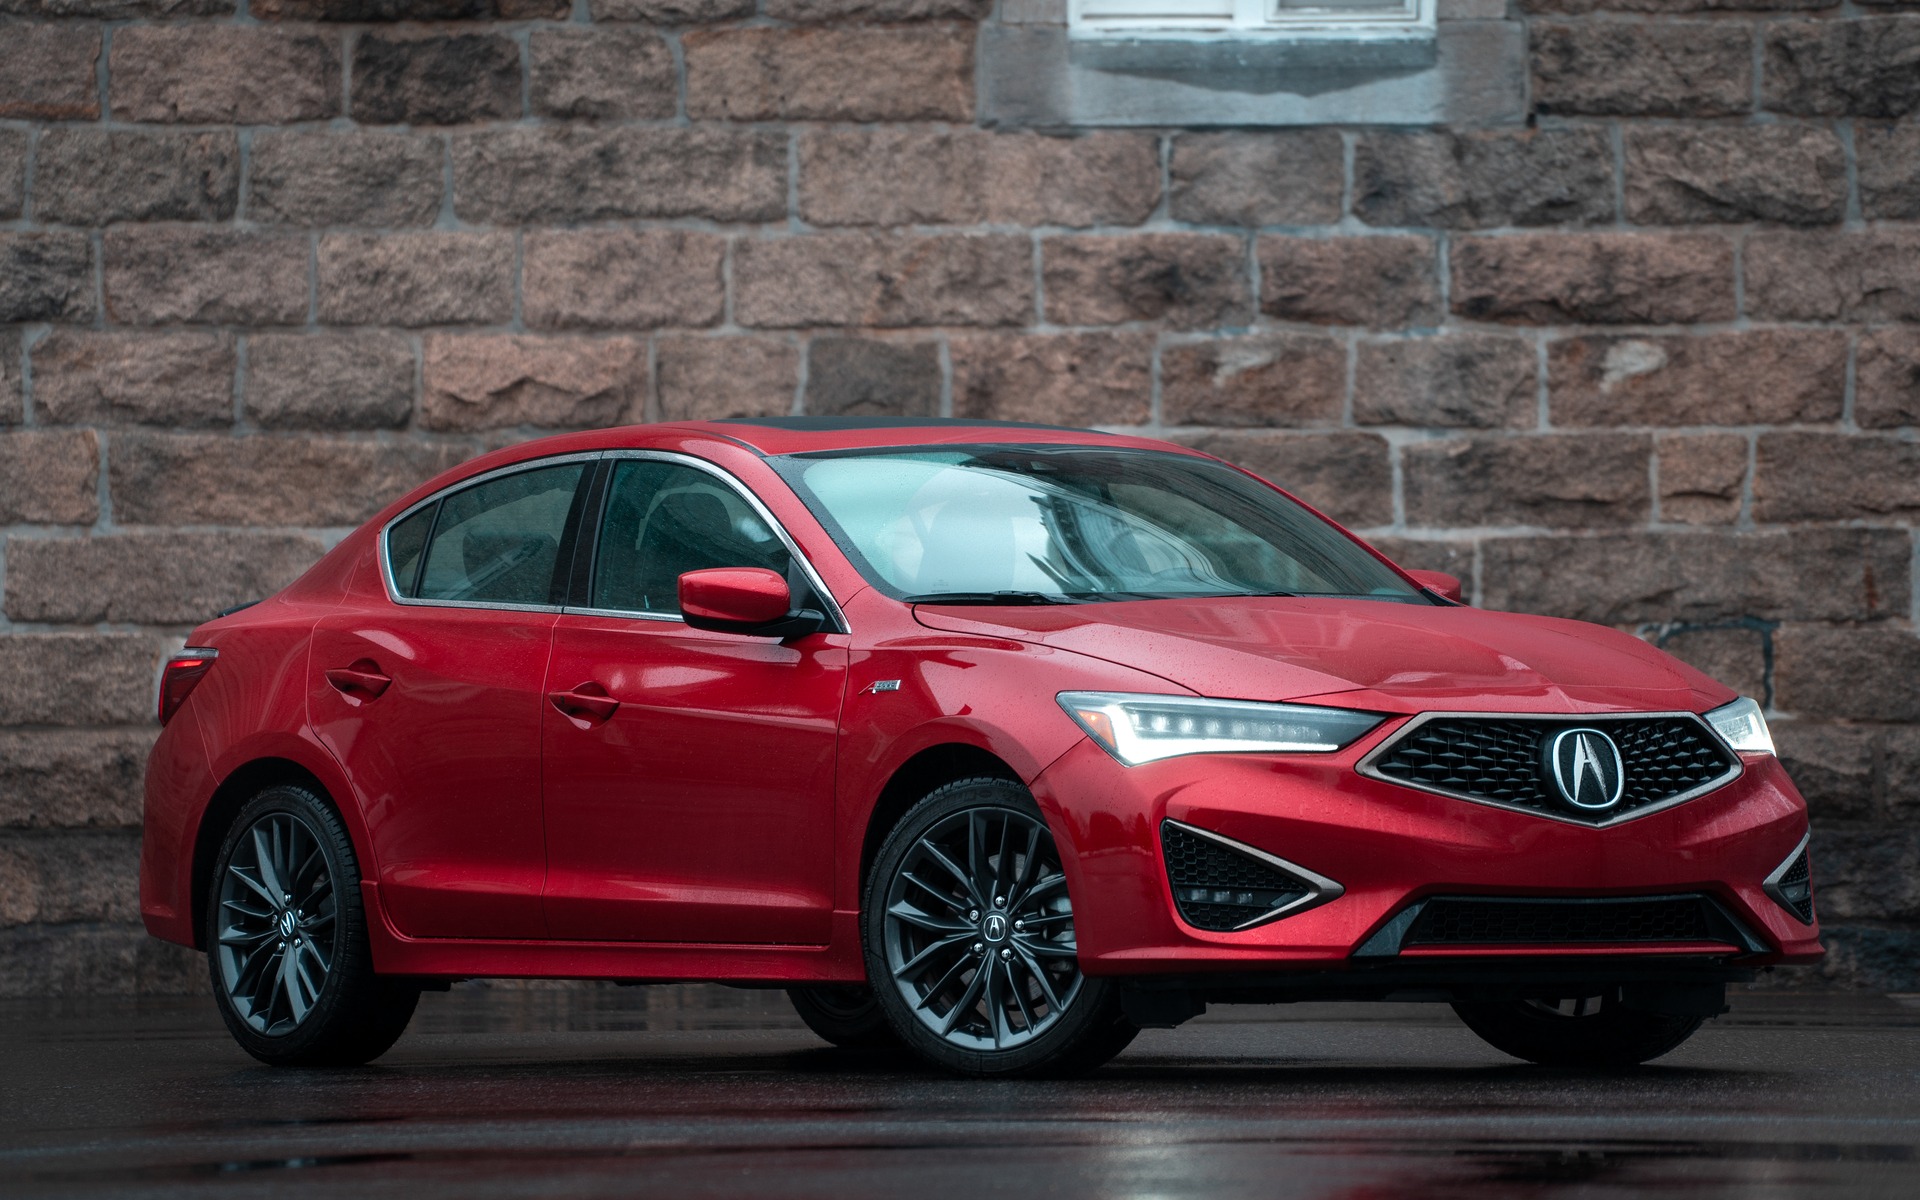 2019 Acura ILX: Recycling Done Well - The Car Guide